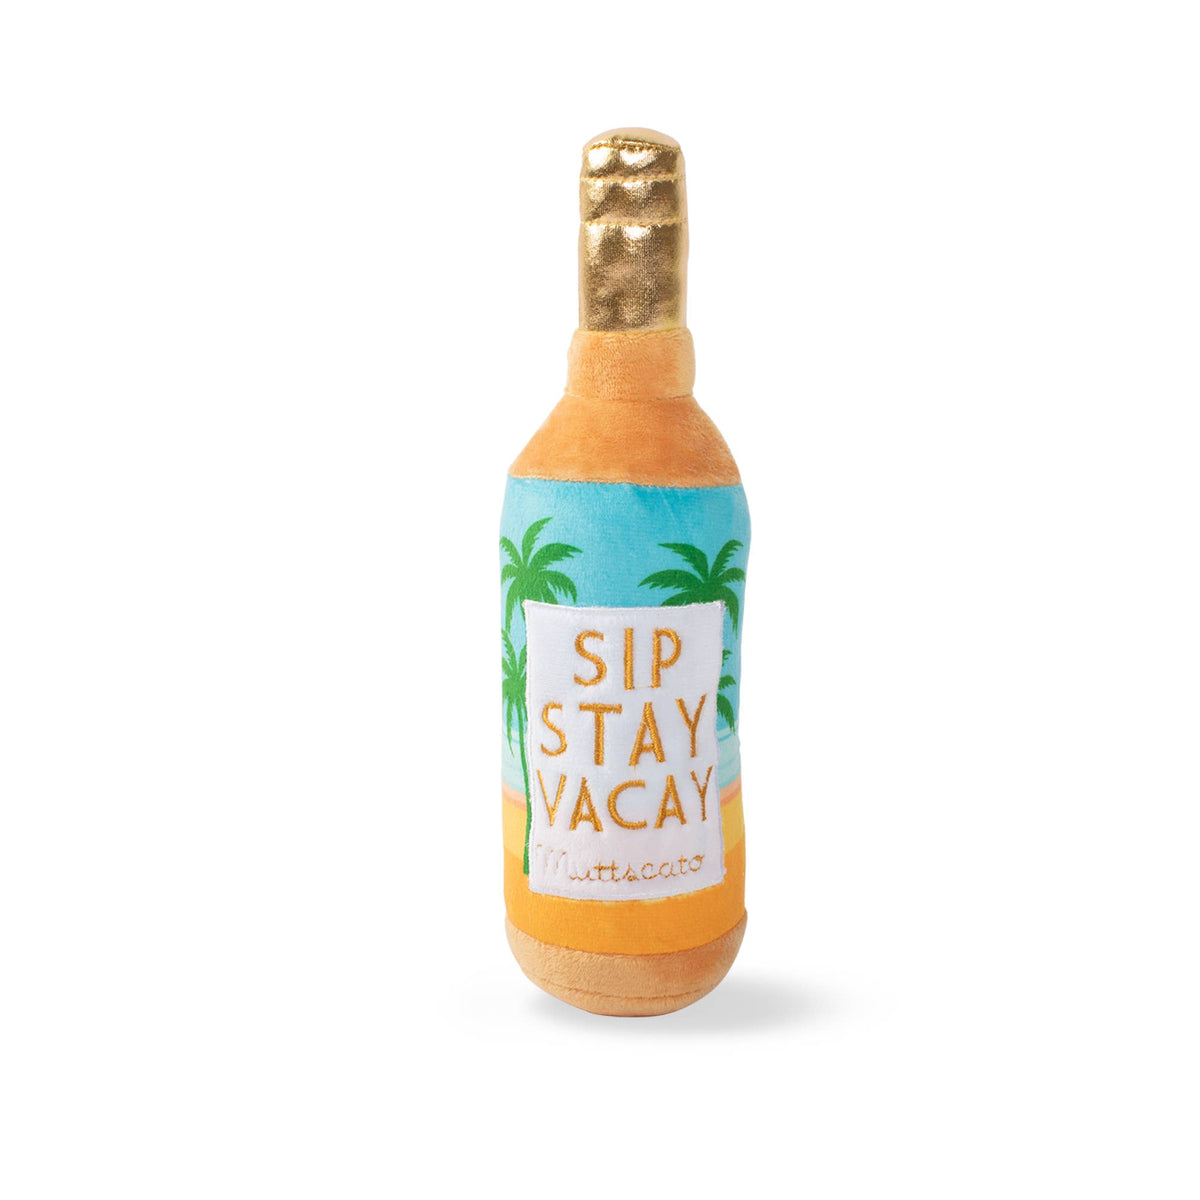 Plush Dog Toy - Sip Stay Vacay